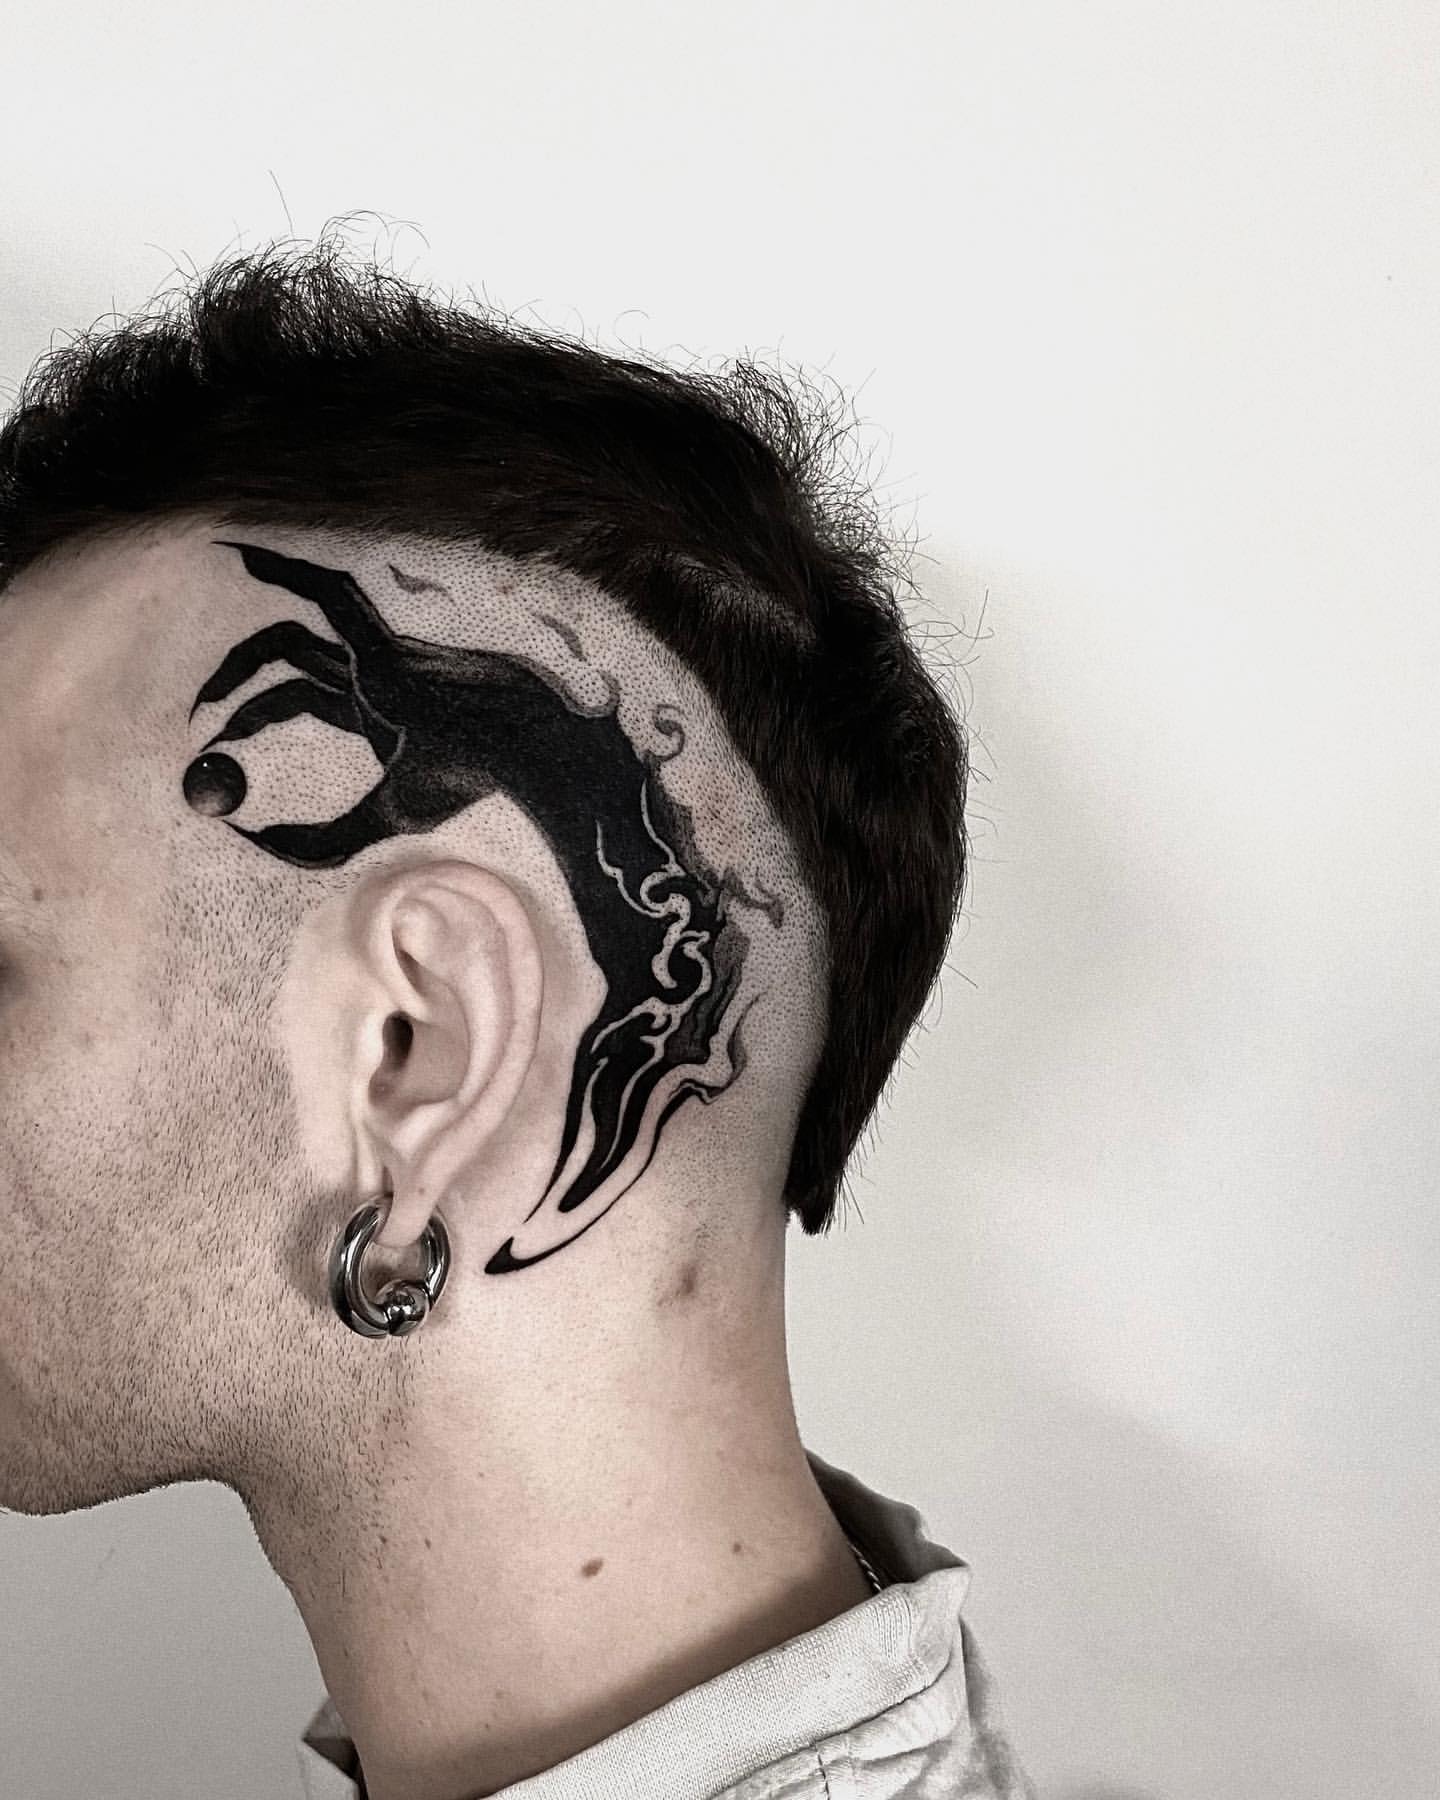 Behind the Ear Tattoos for Men 10